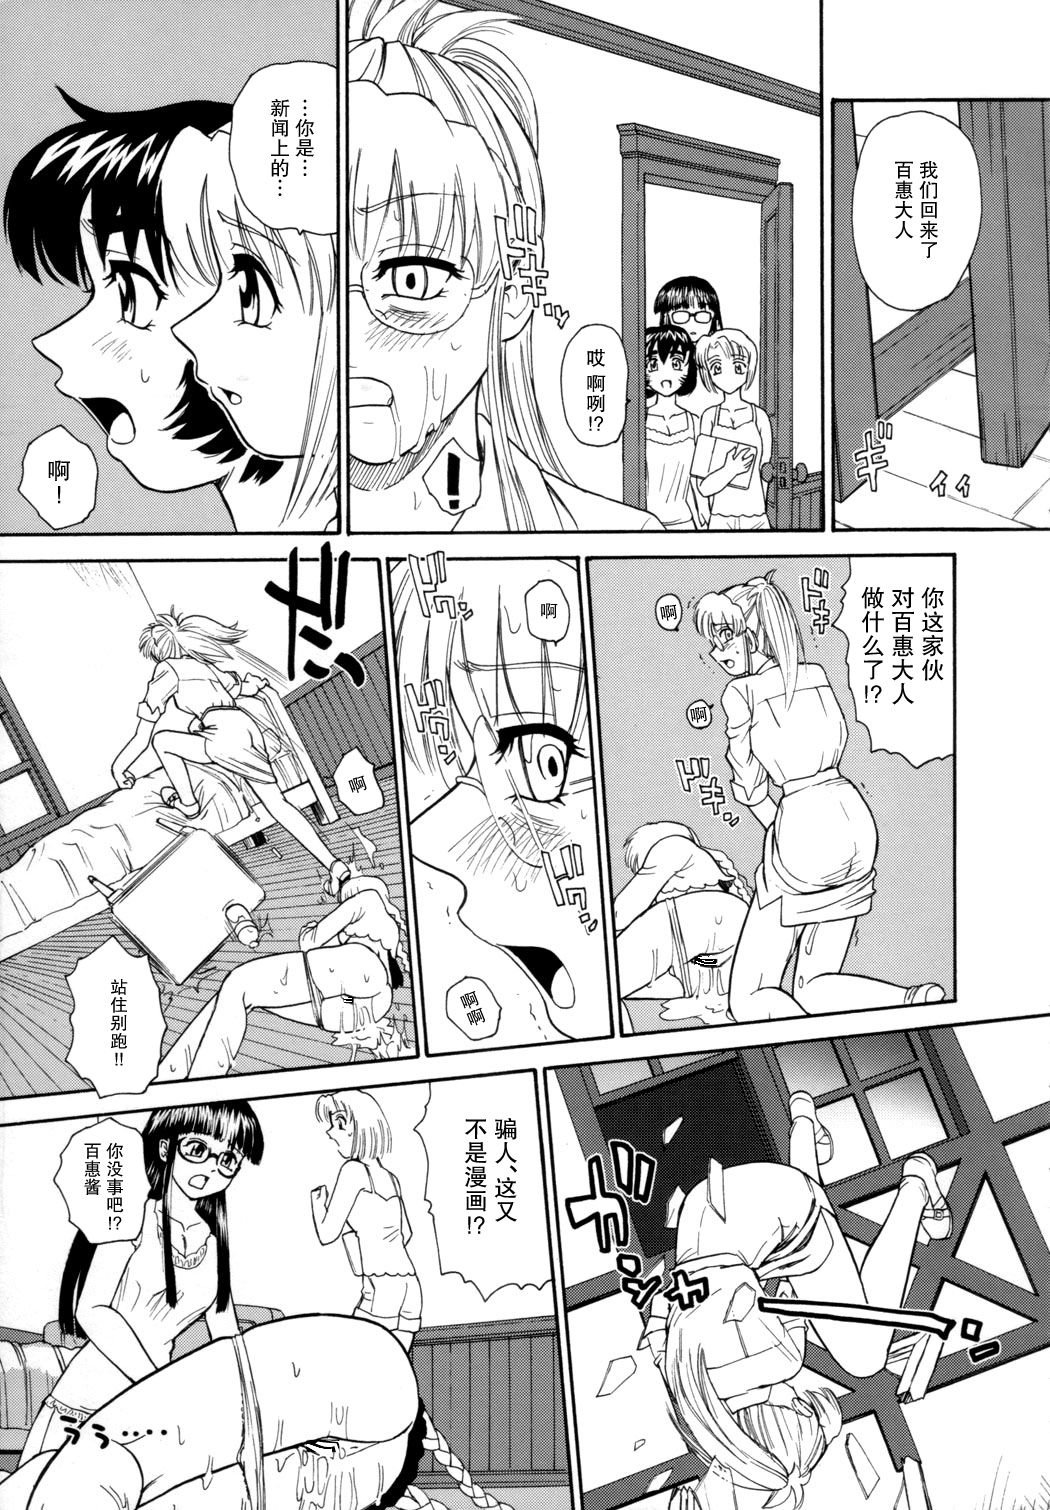 (C72) [Behind Moon (Q)] Dulce Report 9 | 达西报告 9 [Chinese] [哈尼喵汉化组] [Decensored] page 23 full